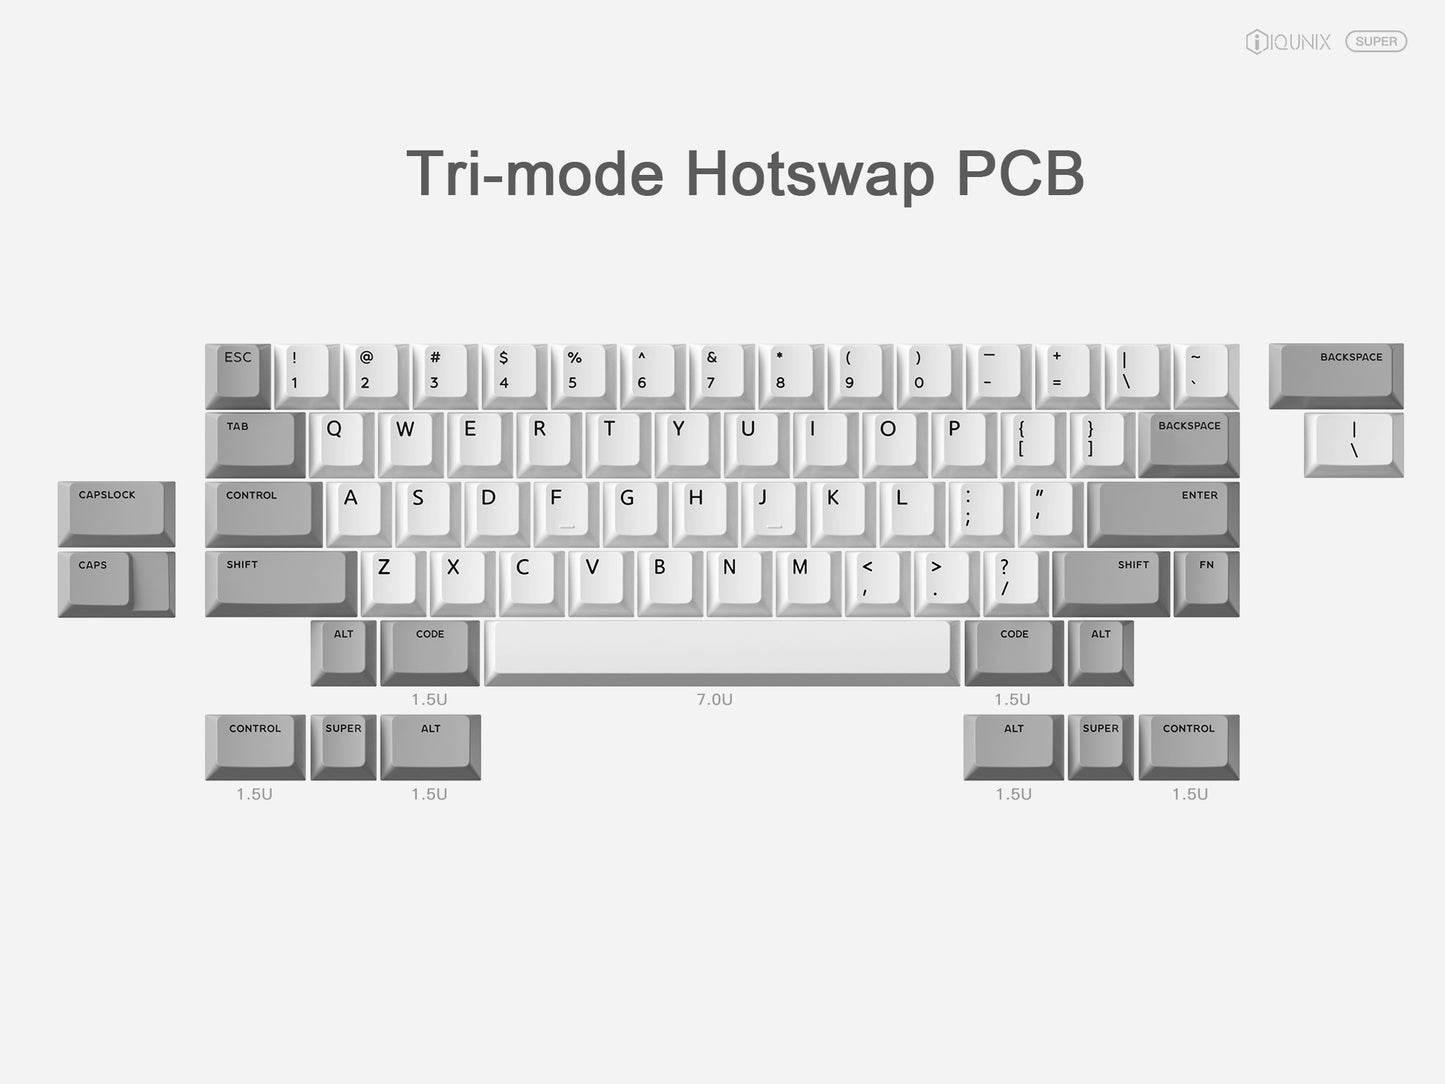 [Group-Buy] Tilly60 Add-ons